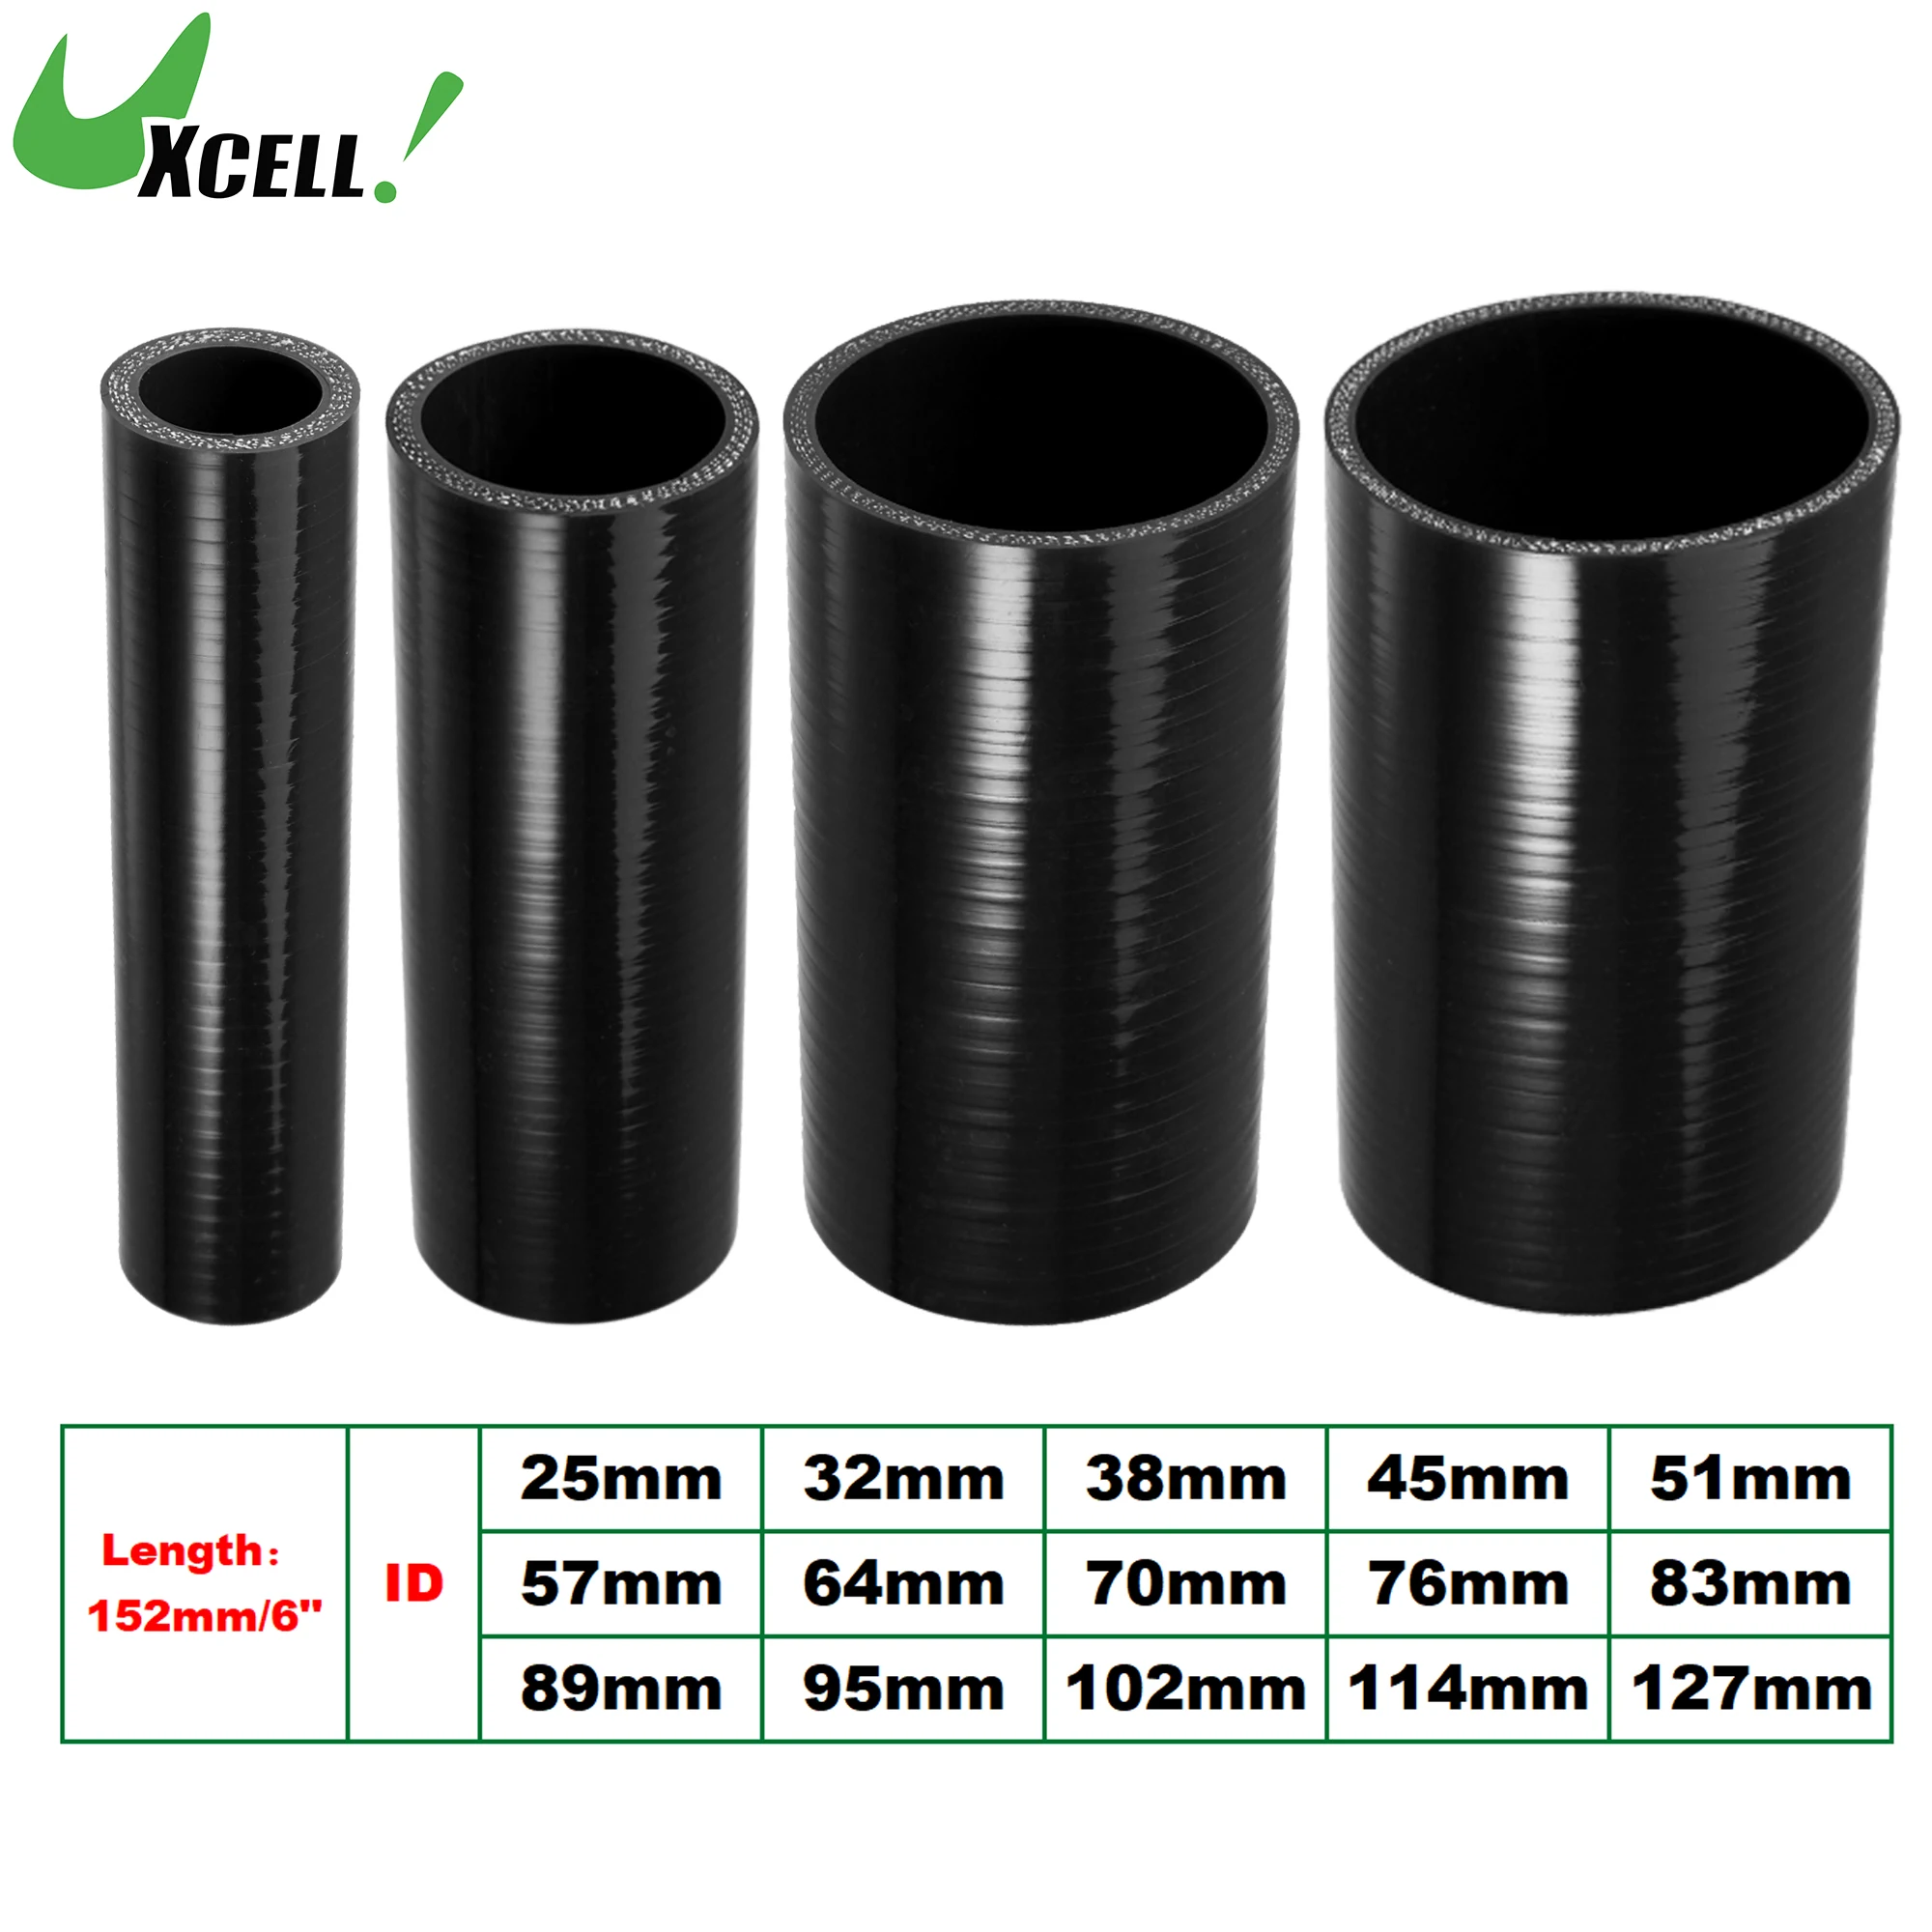 

UXCELL 25mm 57mm 83mm 95mm 114mm ID 152mm Length 4-Ply Reinforced High Temp Straight Coupler Silicone Reducer Hose Black